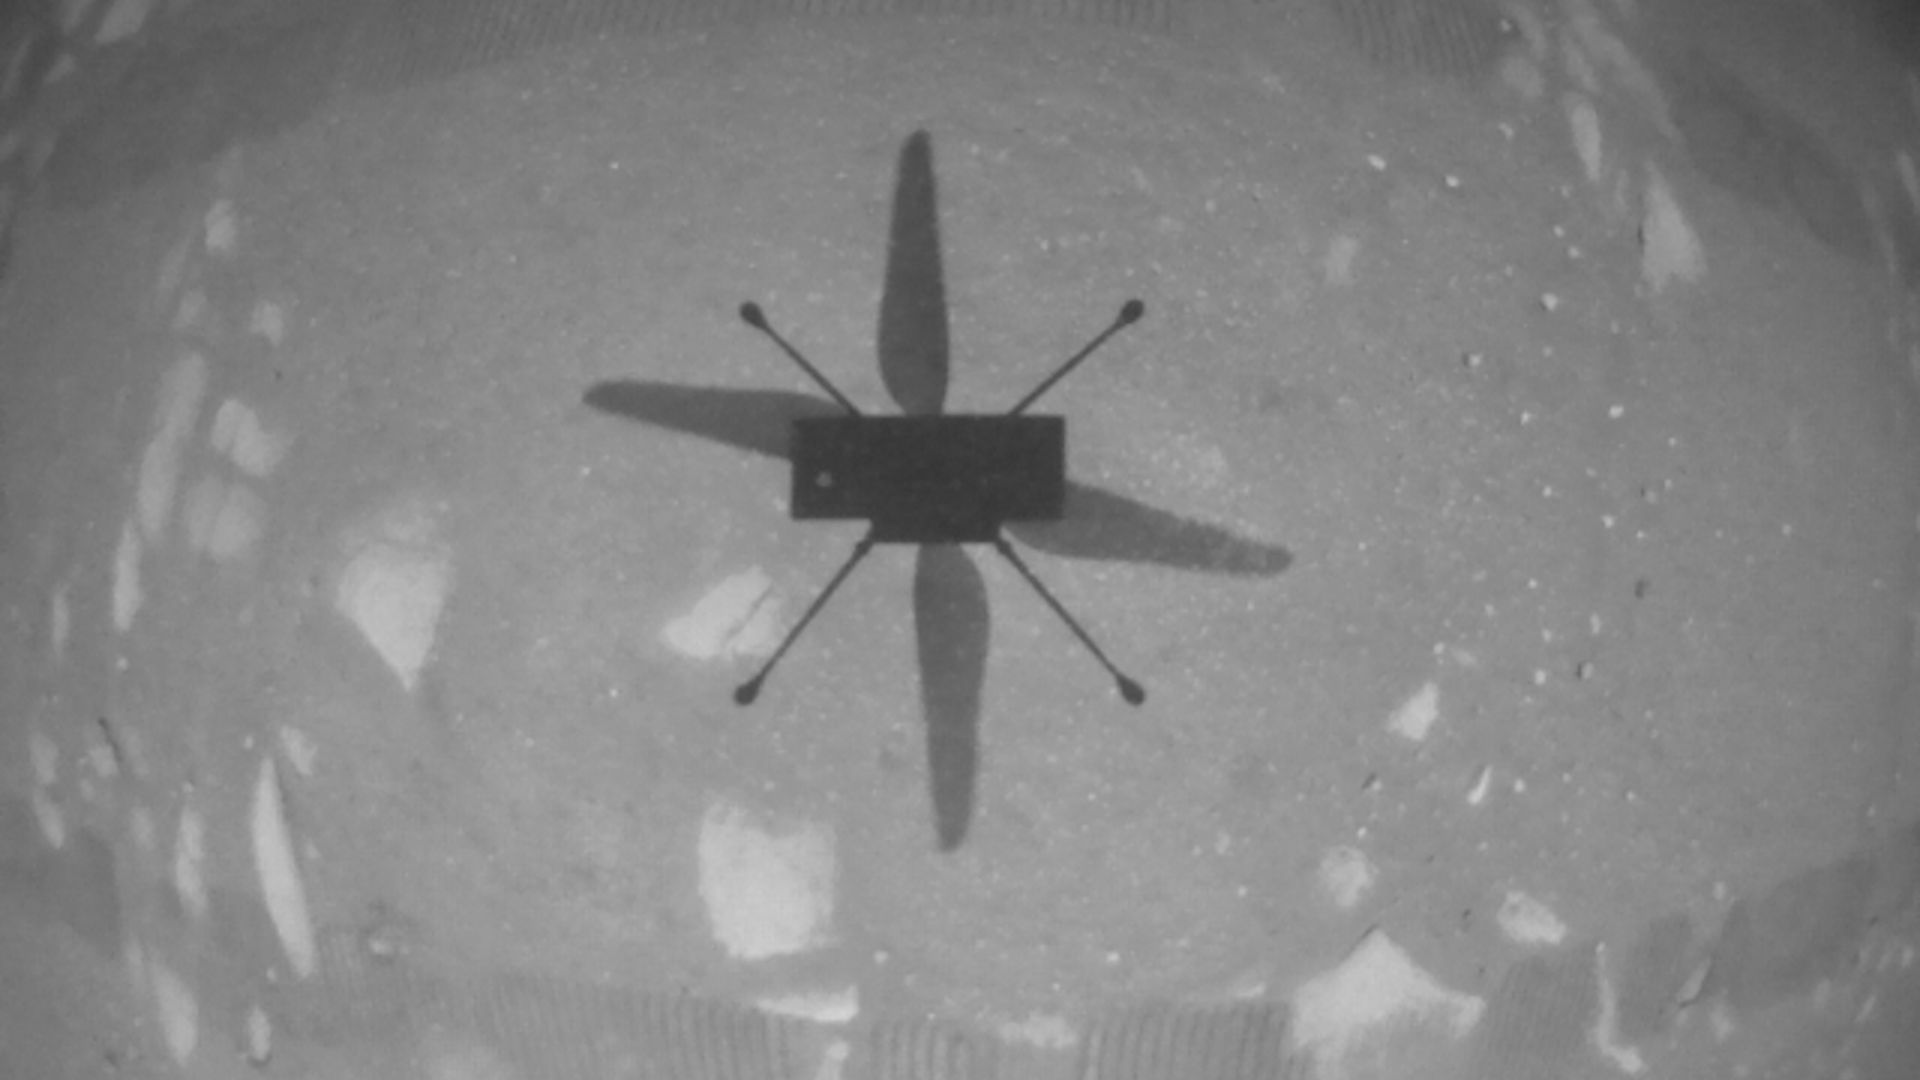 The shadow of the Ingenuity helicopter flying on Mars